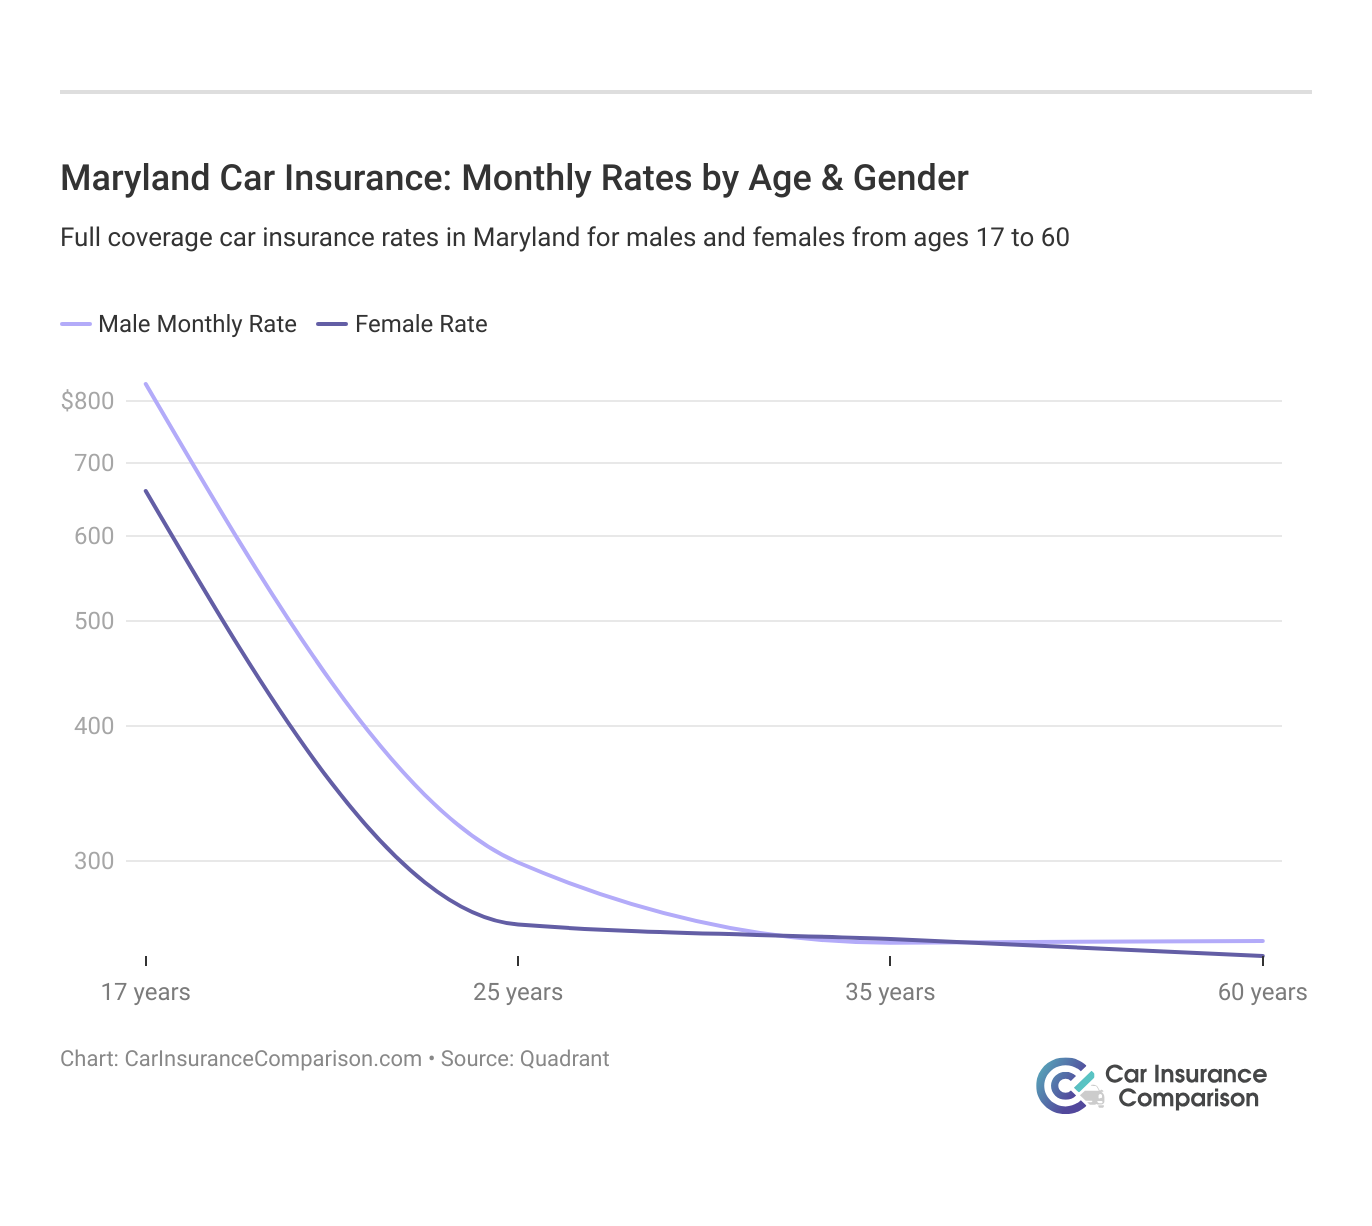 <h3>Maryland Car Insurance: Monthly Rates by Age & Gender</h3>